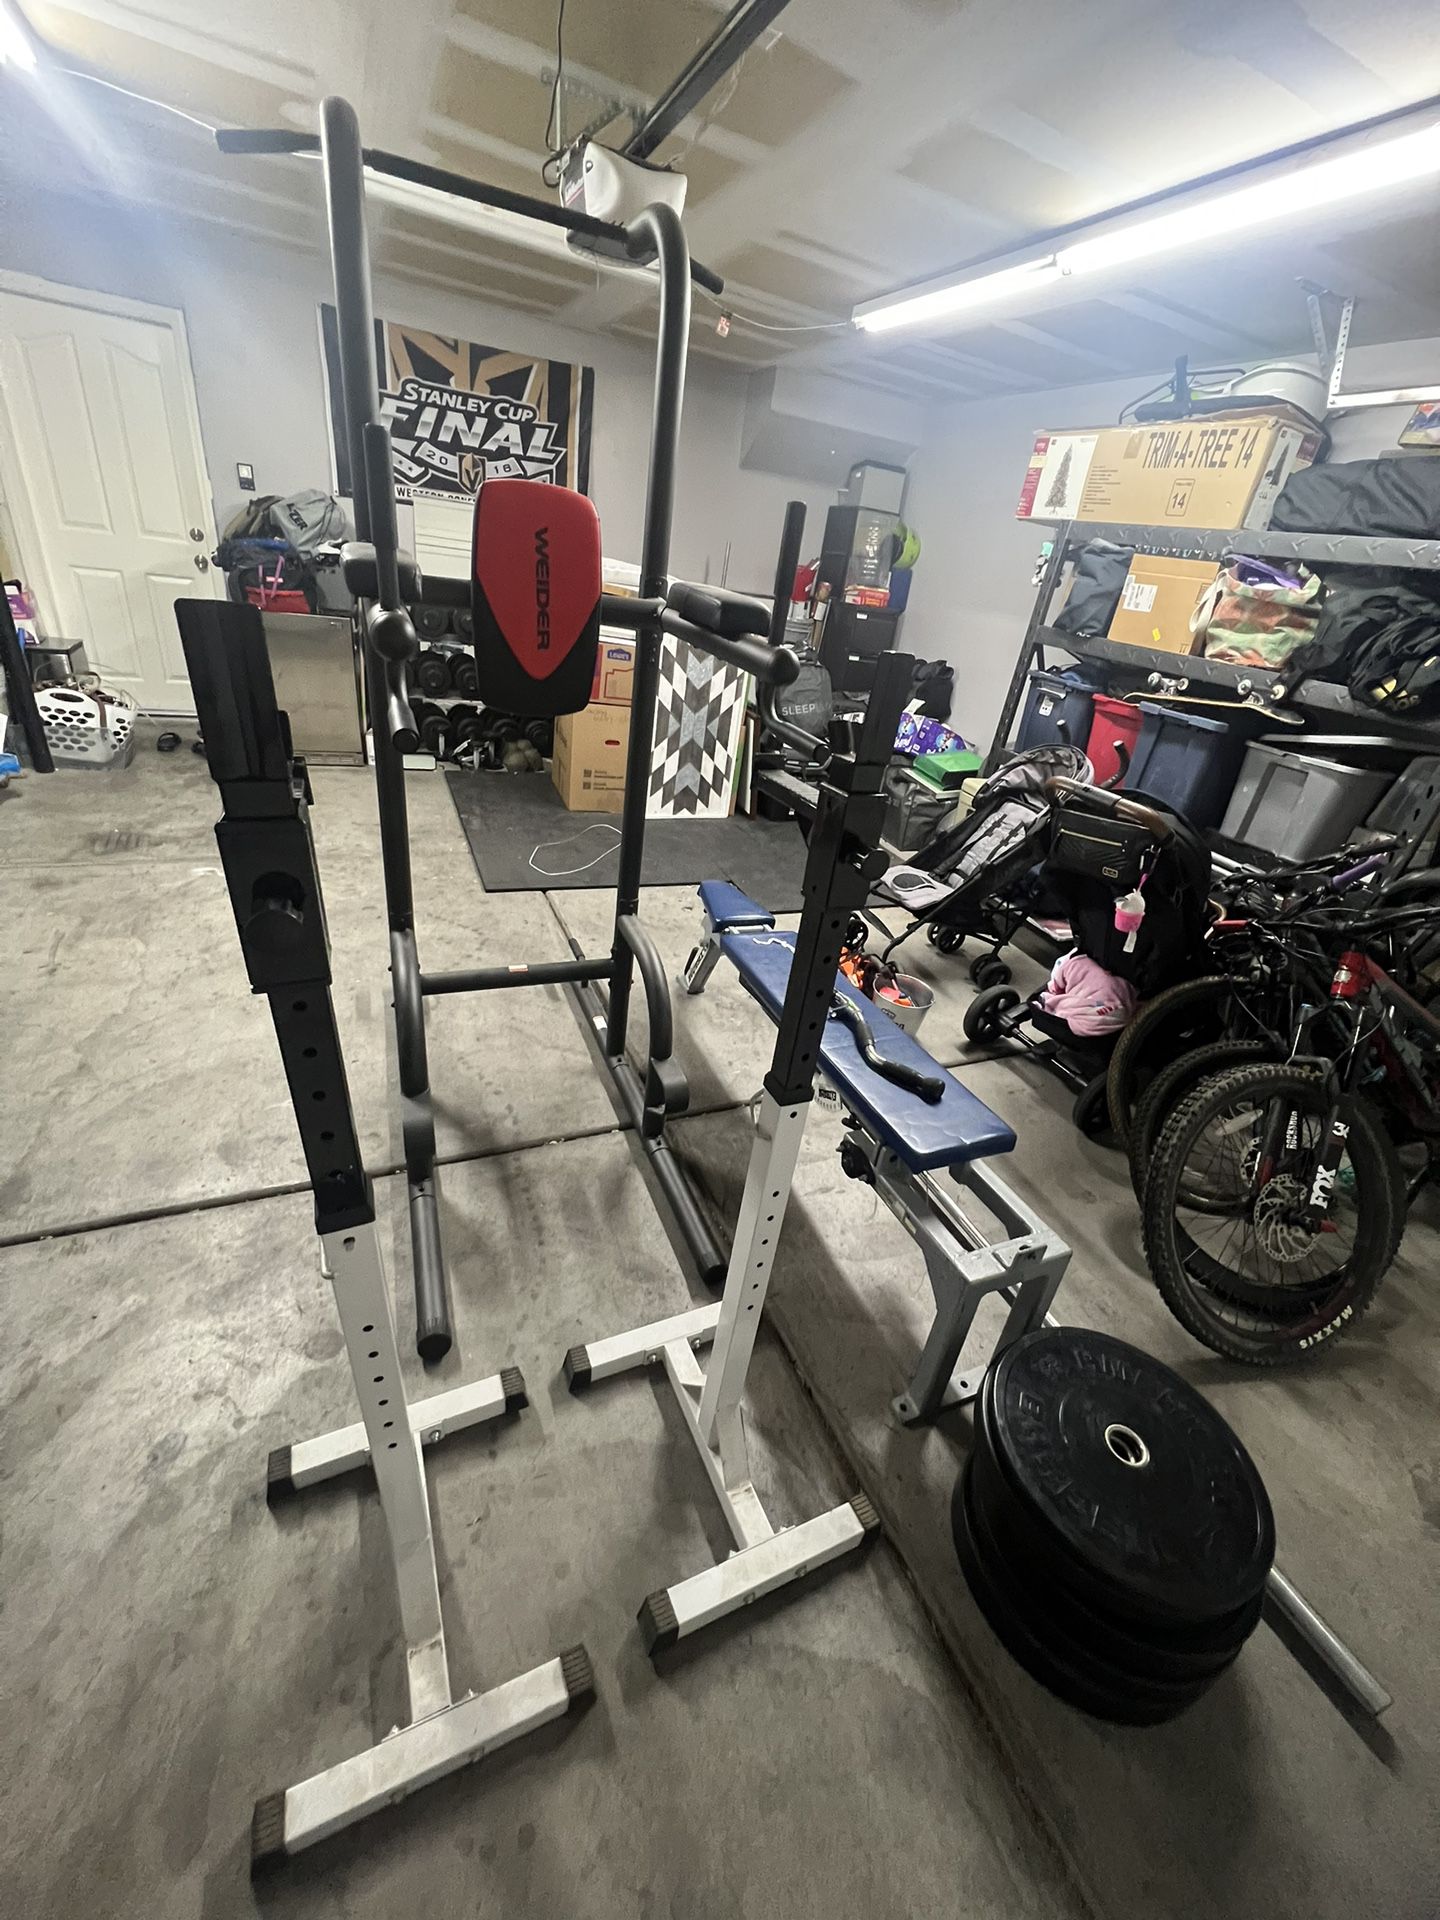 Workout Equipment - Weights, Power Tower, Barbell, Bench 